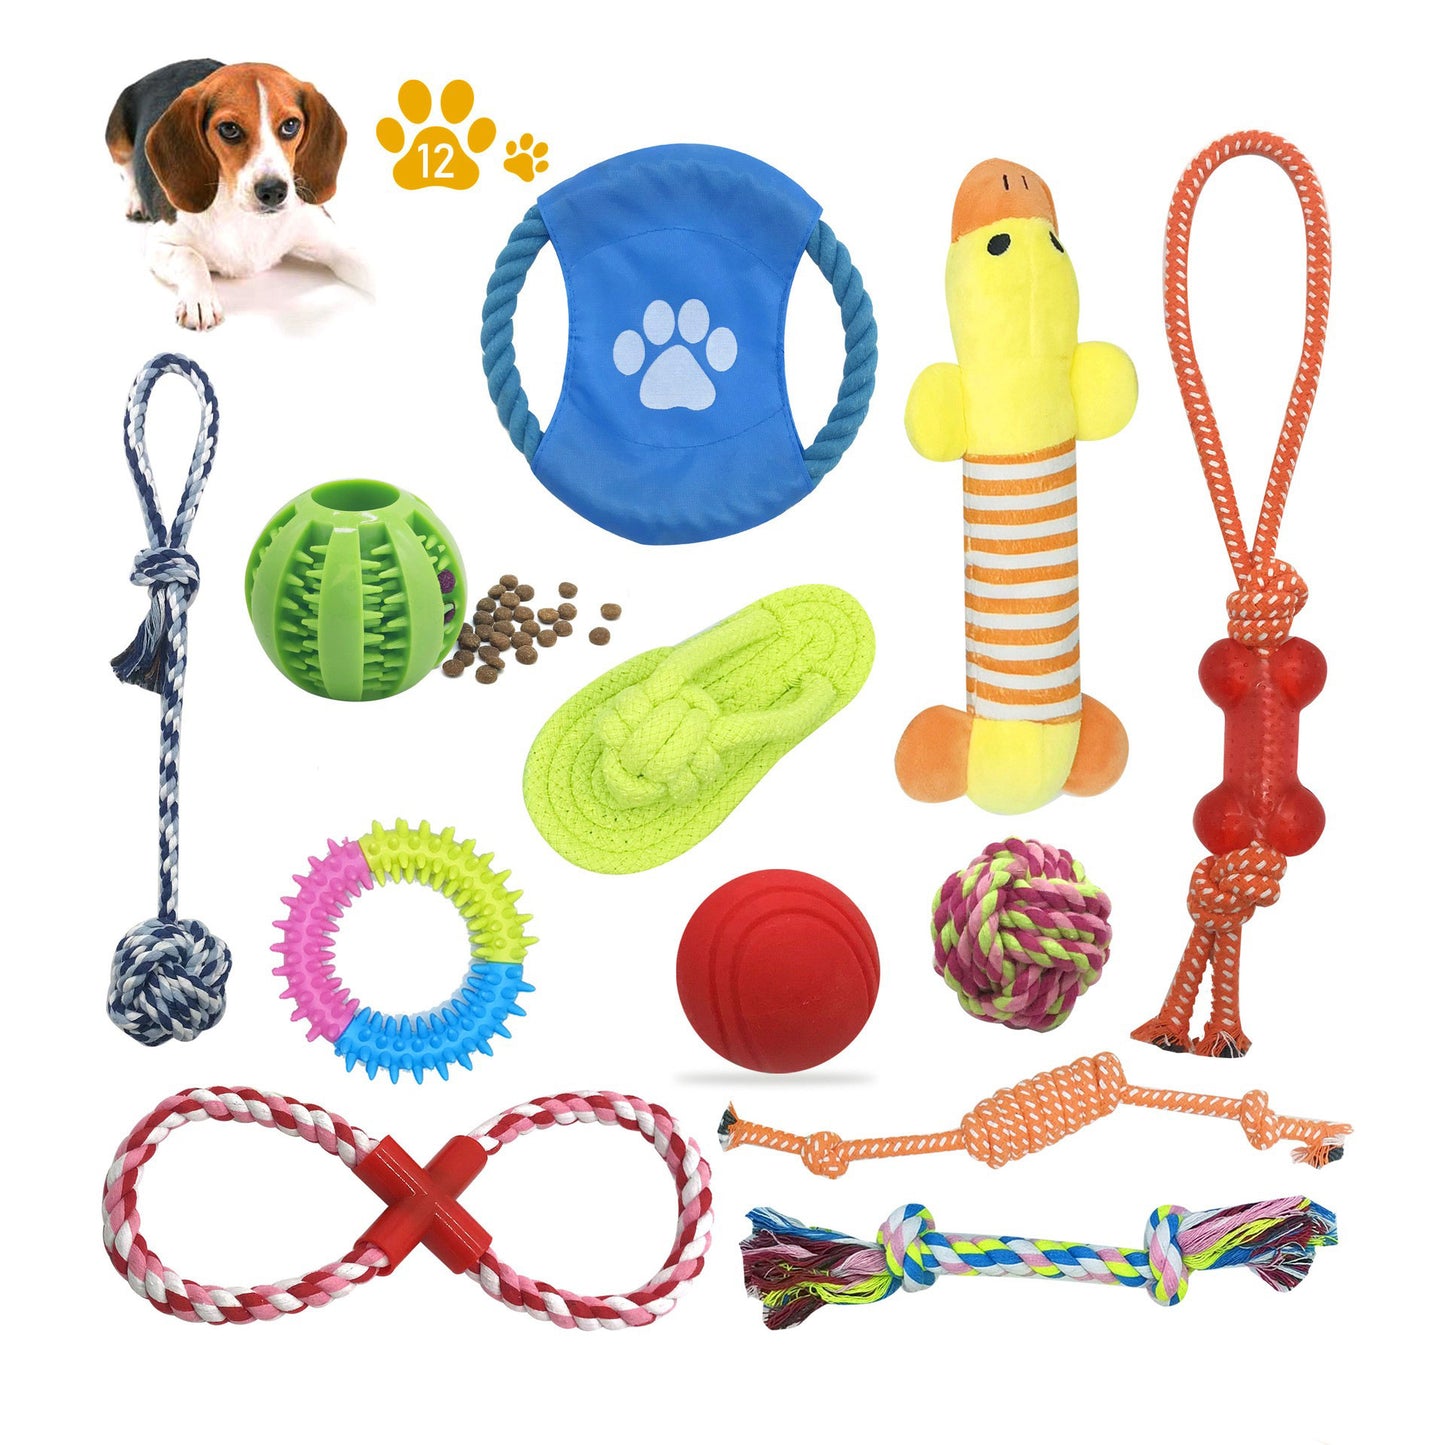 Multi-pack of interactive puppy chew toys